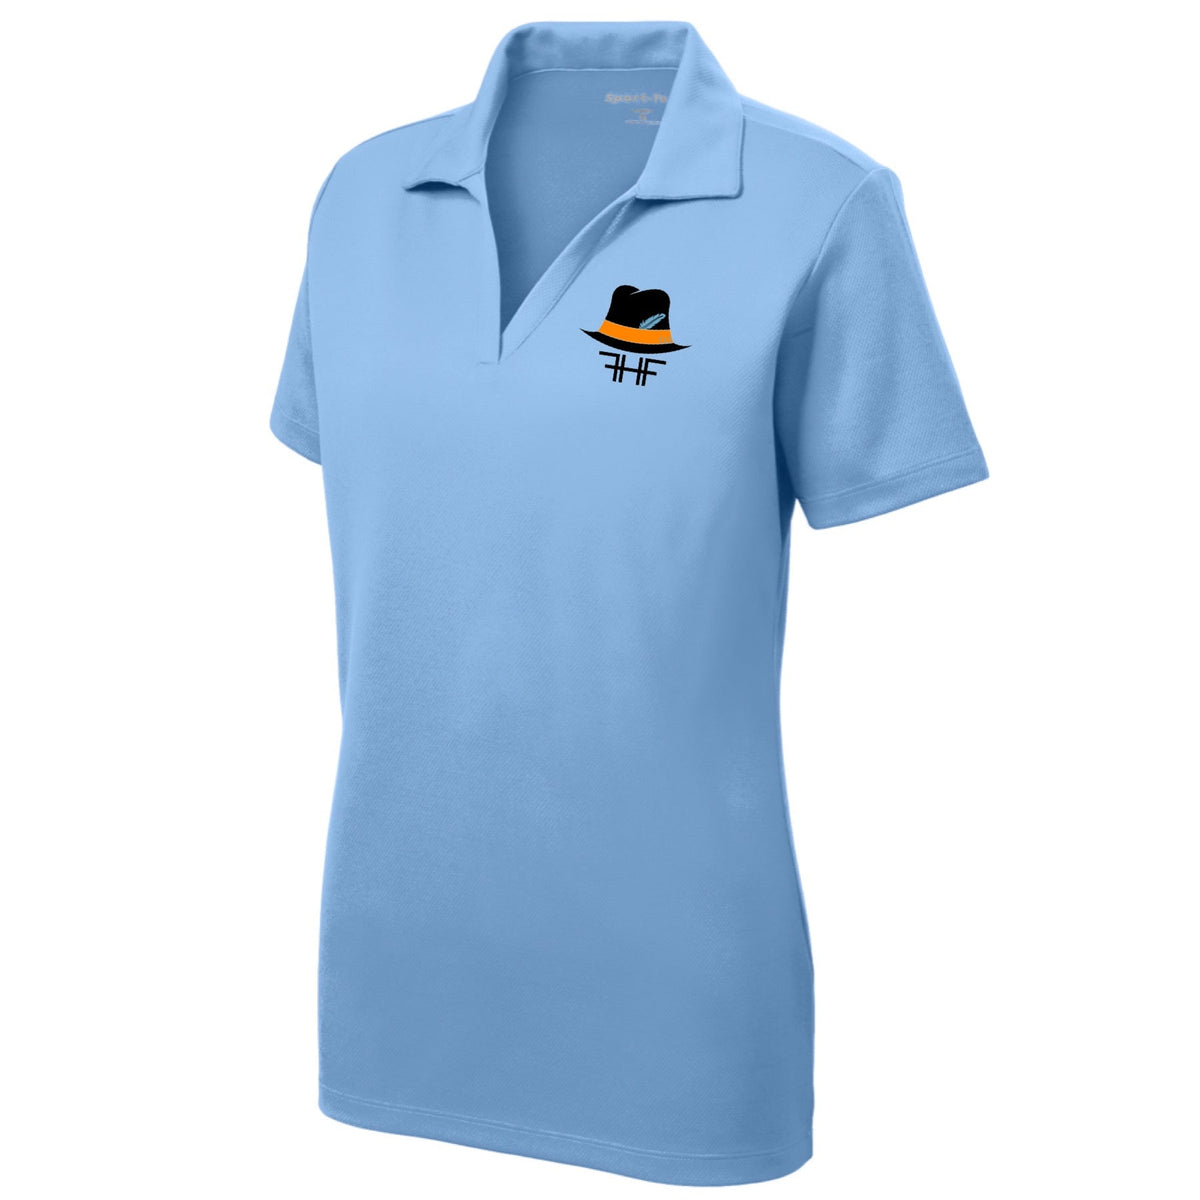 Equestrian Team Apparel Fetching Hat Farm Polo Shirts equestrian team apparel online tack store mobile tack store custom farm apparel custom show stable clothing equestrian lifestyle horse show clothing riding clothes horses equestrian tack store